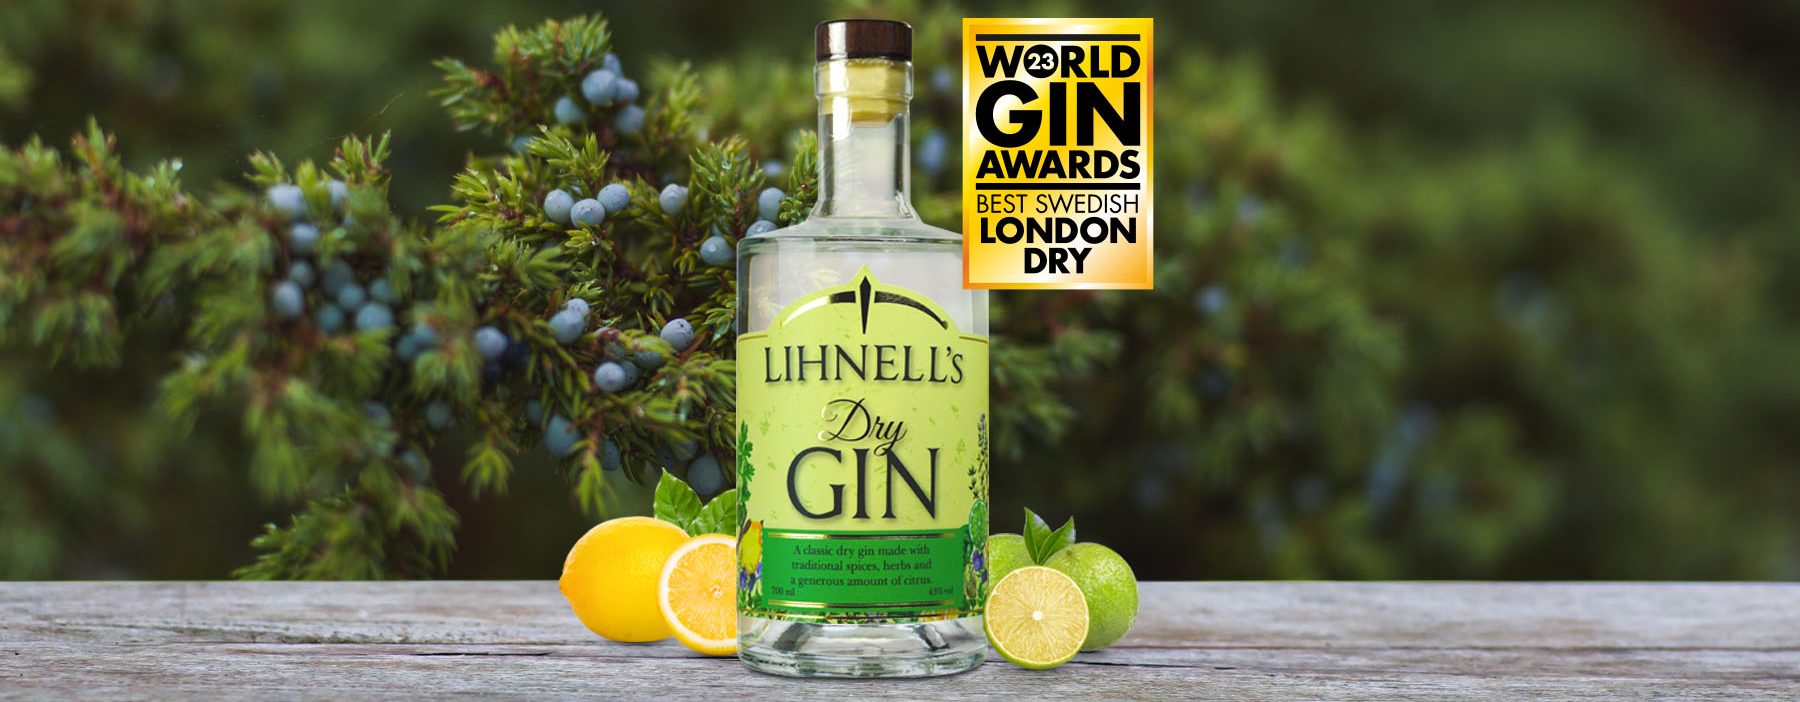 LIHNELL´s GIN